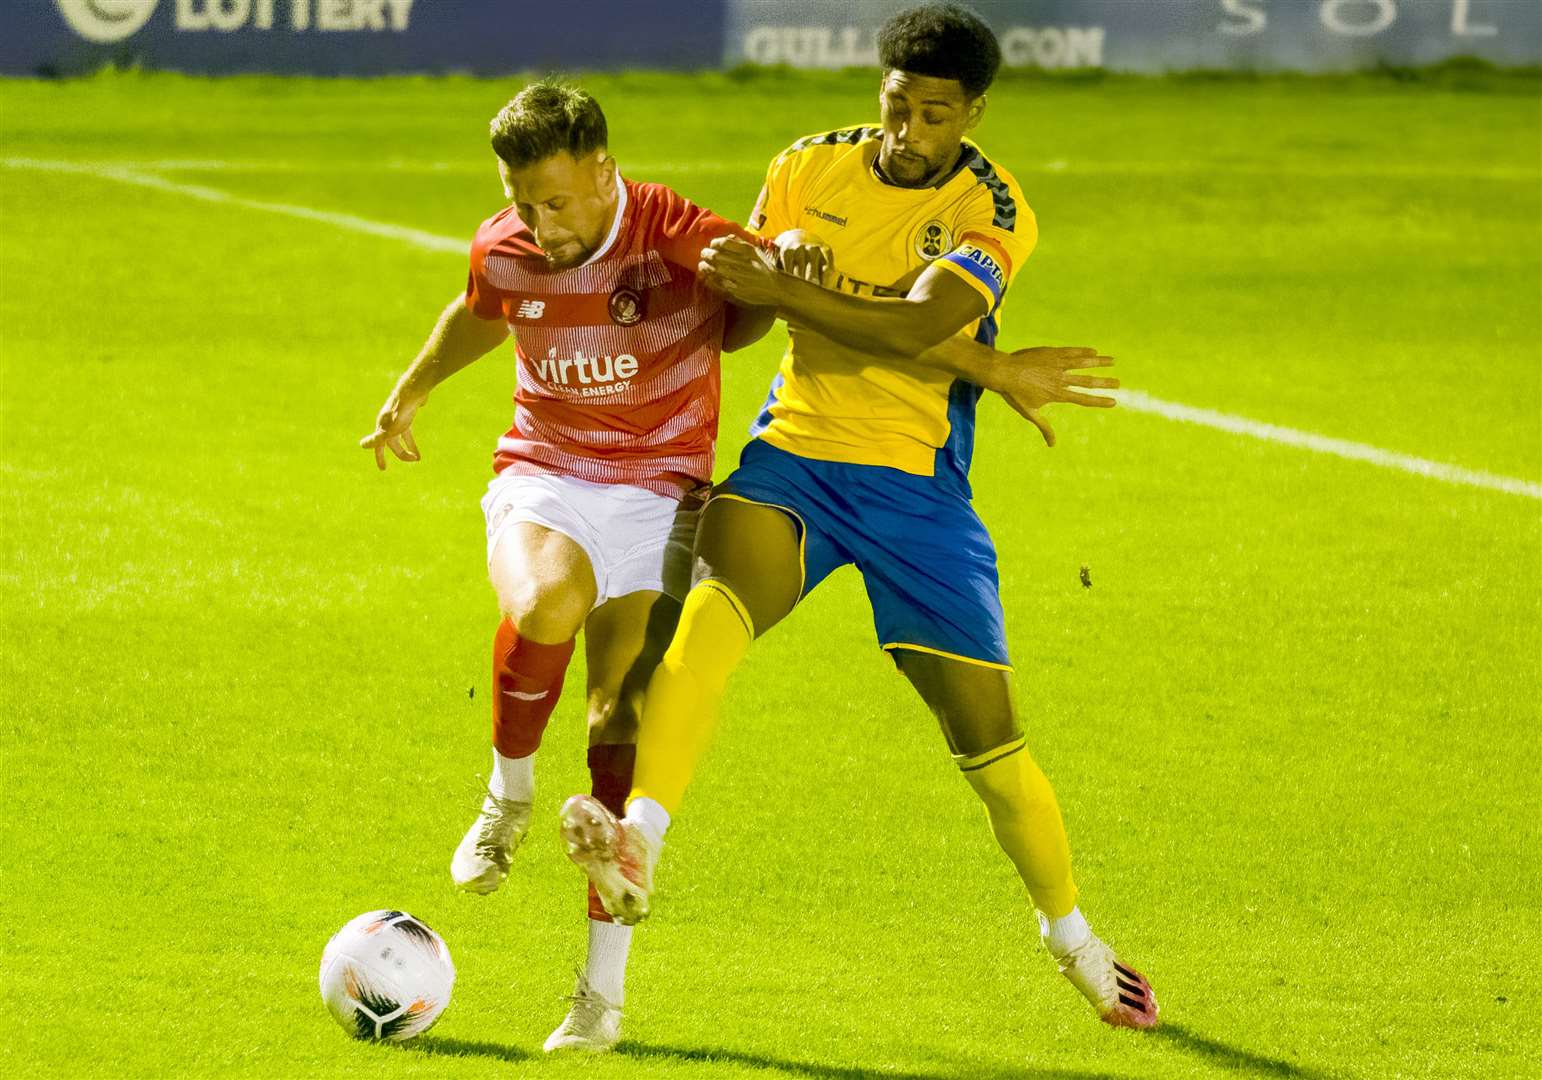 Right-back Luke O'Neill tries to move forward during Ebbsfleet's National League South win over St Albans City. Picture: Ed Miller/EUFC